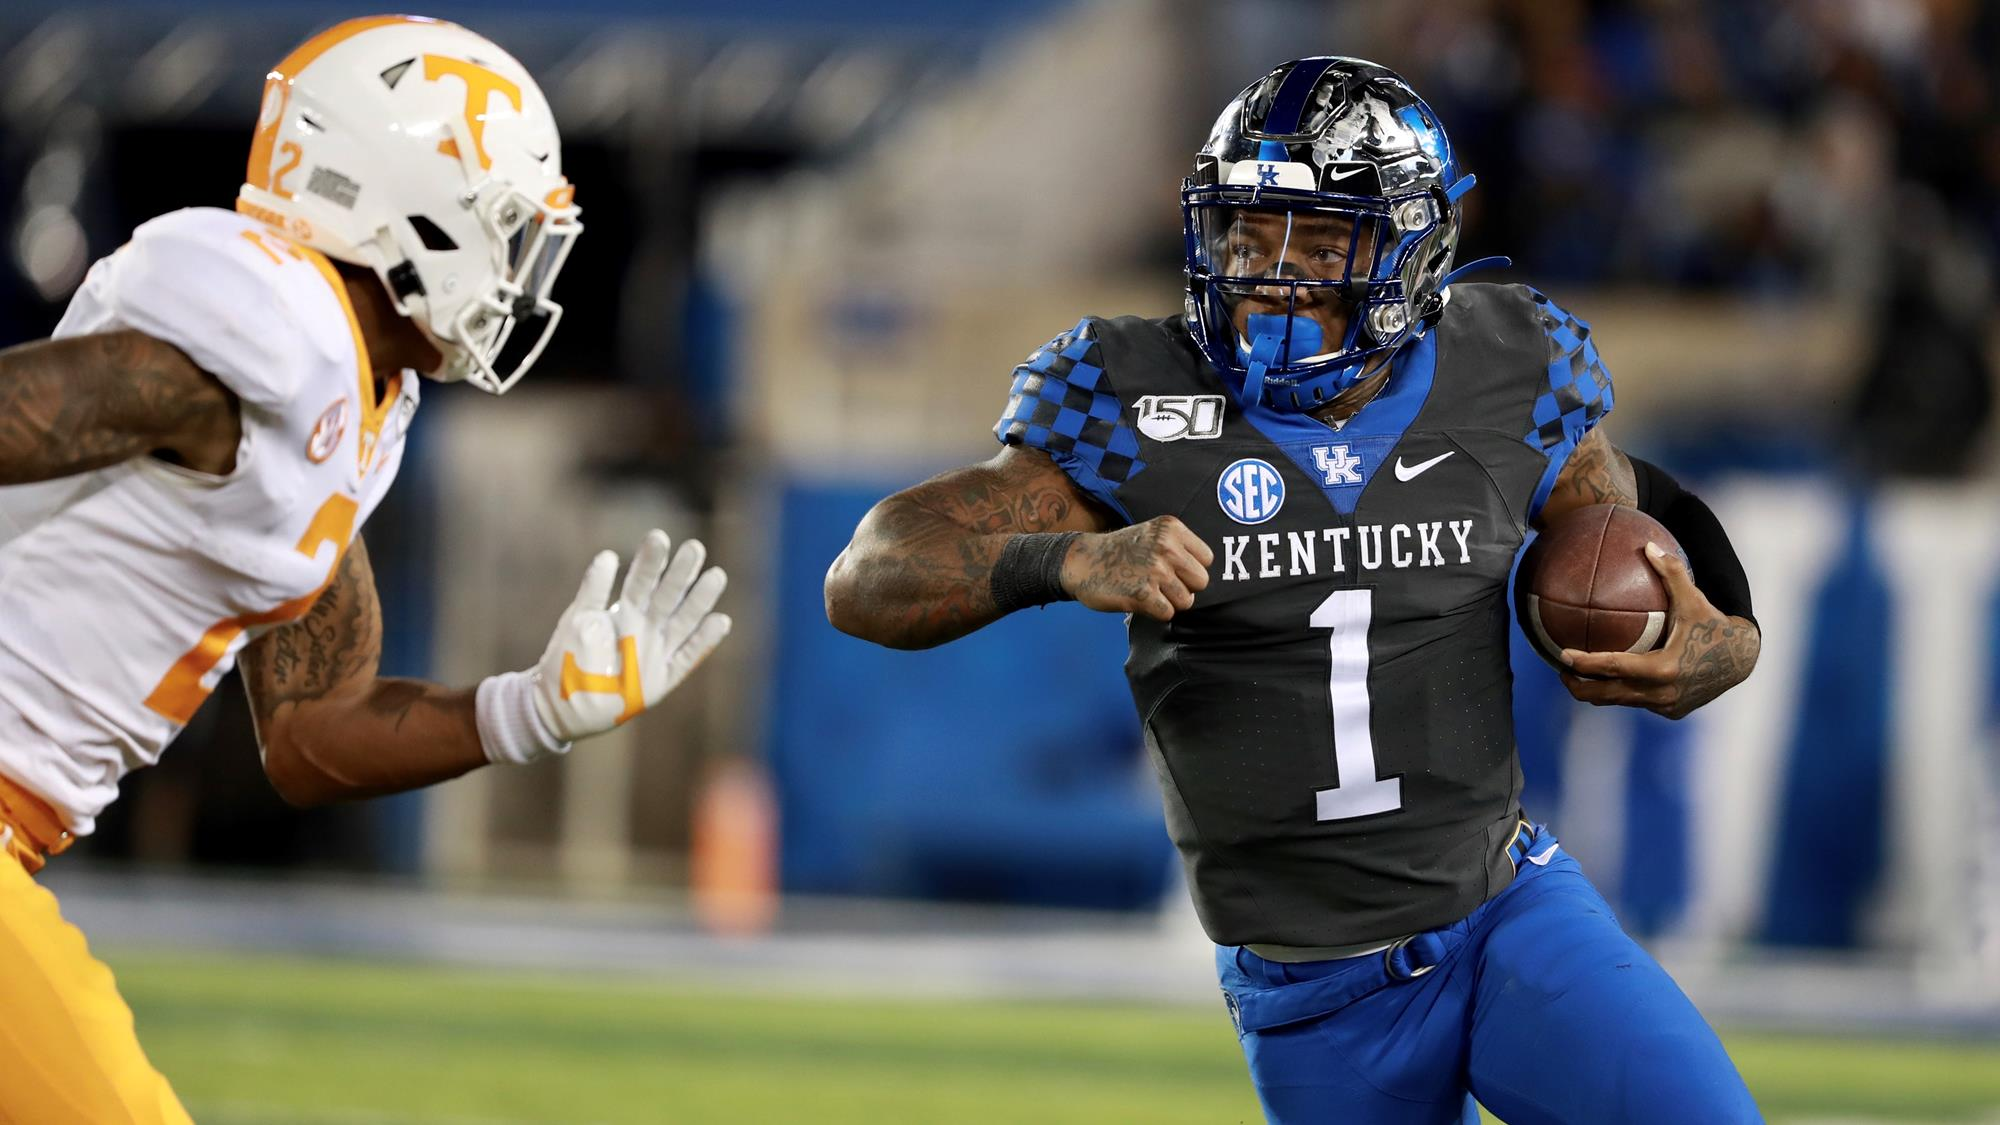 More All-America, All-SEC Honors Pile Up for Wildcats